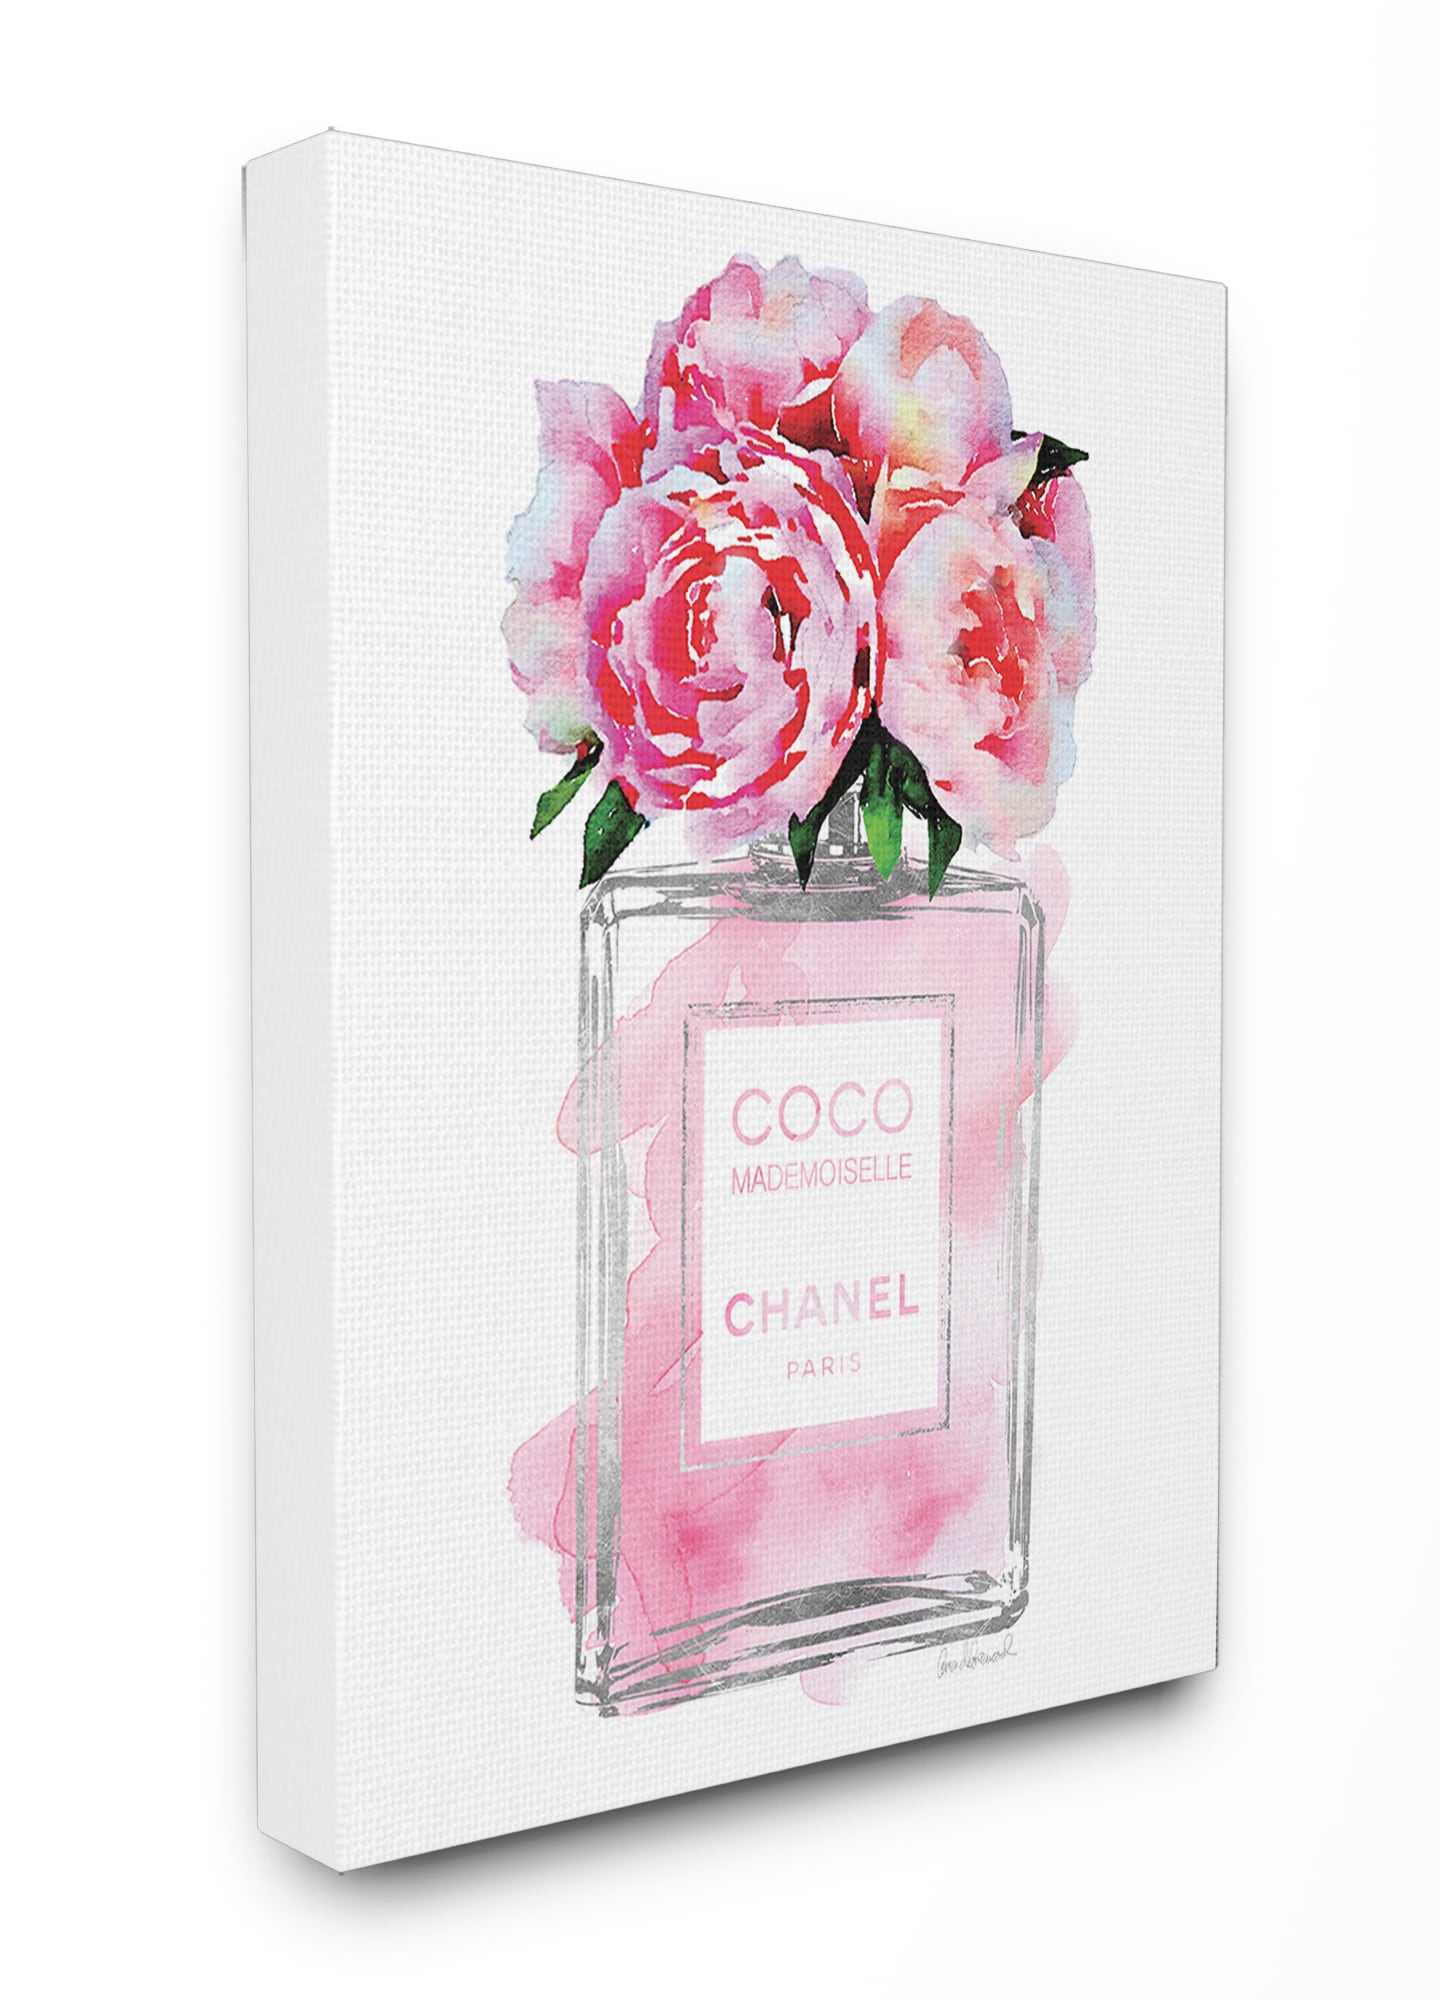 Designart Chic Perfume Bottle with Pink Roses I Fashion Framed Art Print - 24 in. Wide x 24 in. High - Black